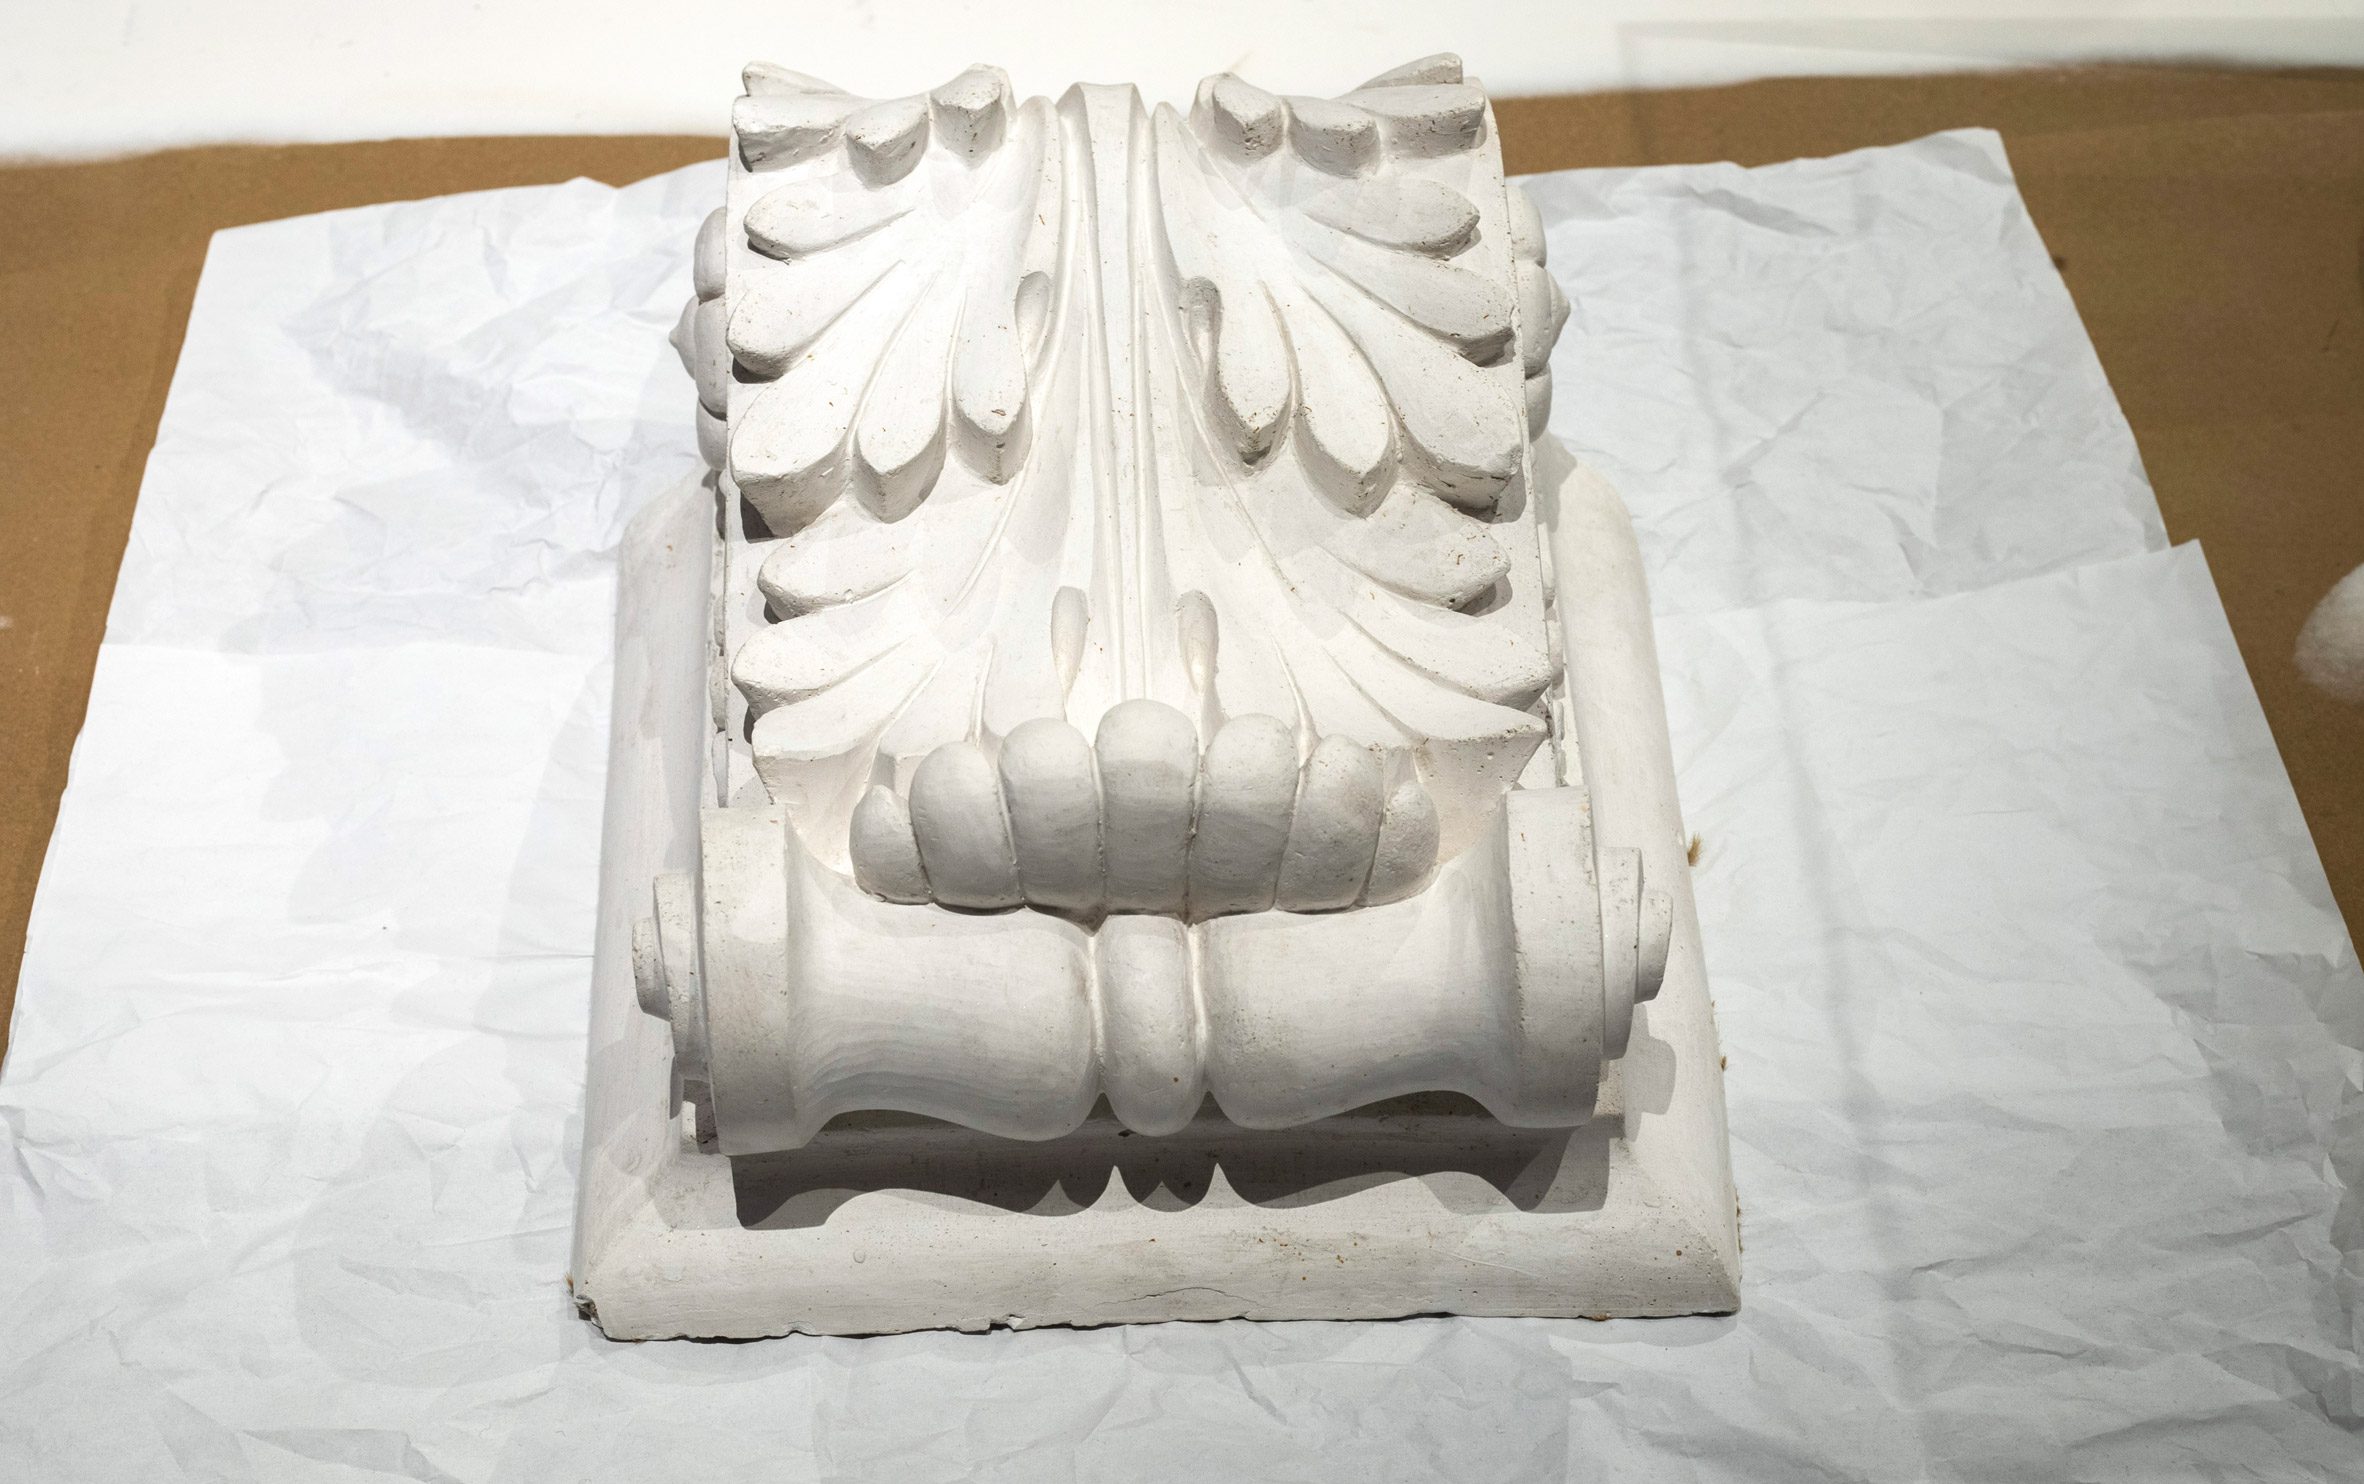 Photo of a plaster copy of a decorative volute from the main door from the Museum of Finnish Architecture building, resting on a surface